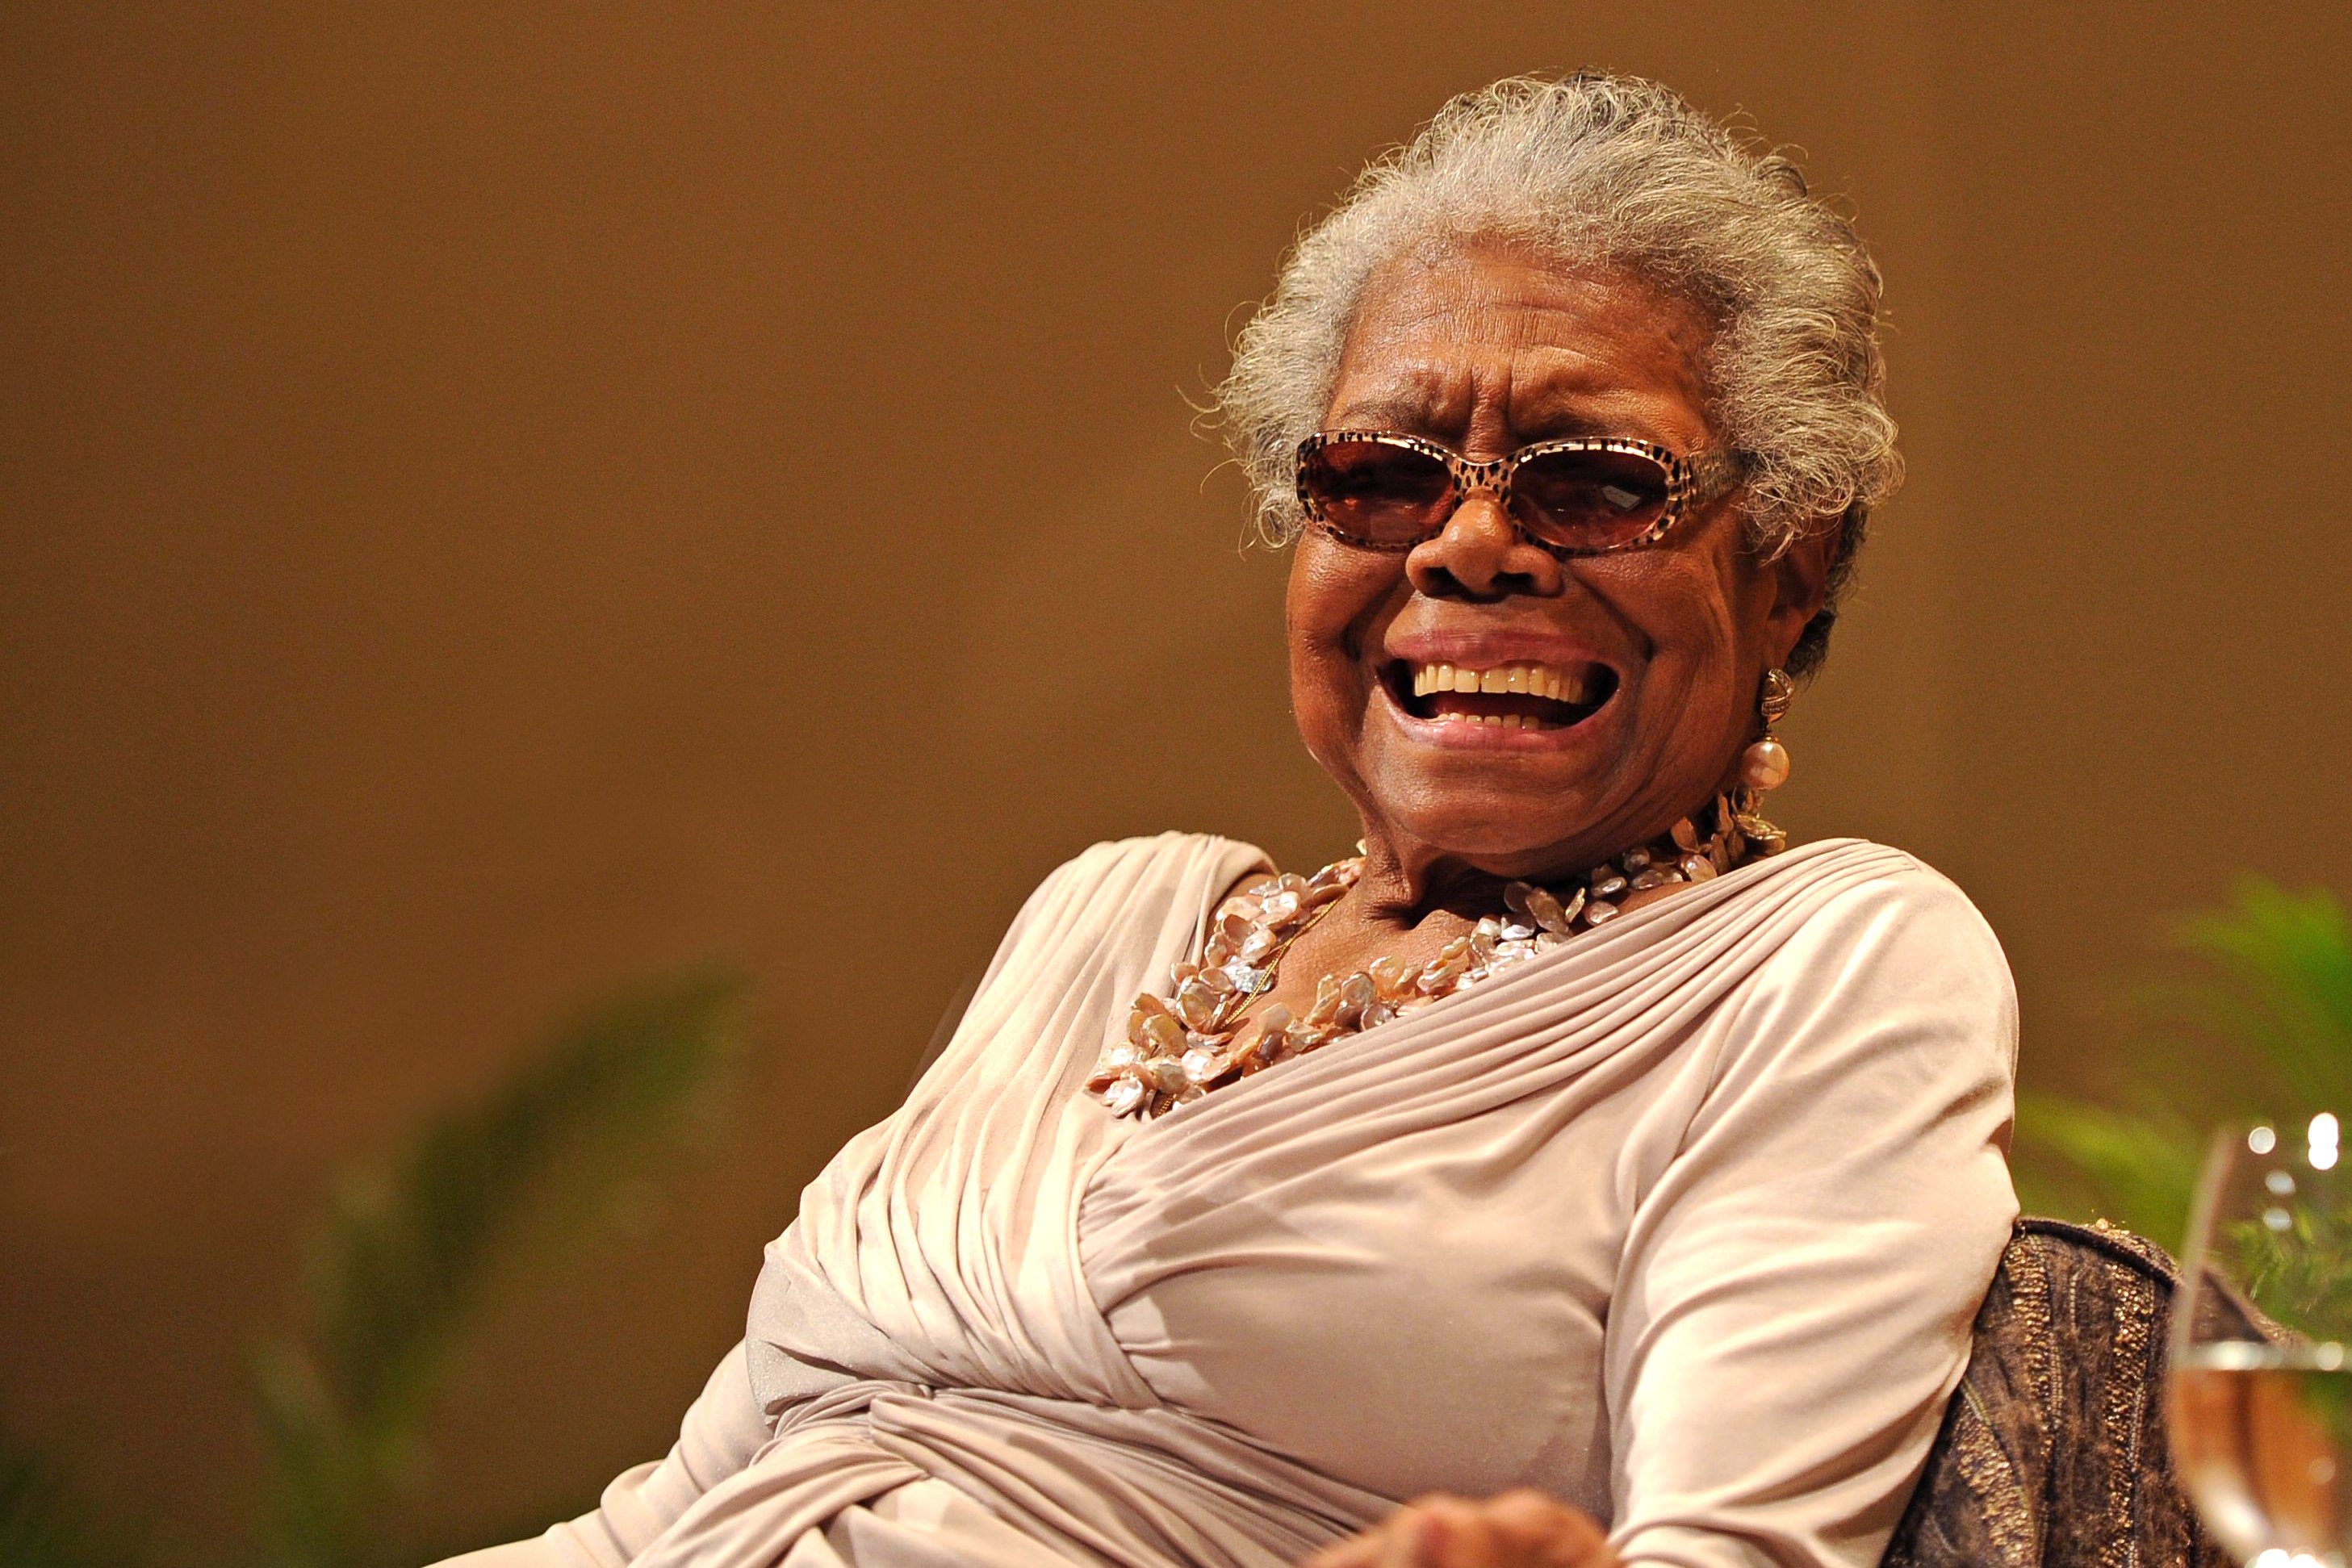 Mandatory Credit: Photo by Jeff Daly/Invision/AP/Shutterstock (9084077b) Dr. Maya Angelou speaks on race relations at Congregation B'nai Israel and Ebenezer Baptist Church on in Boca Raton, Florida Dr. Maya Angelou - Florida, Boca Raton, USA